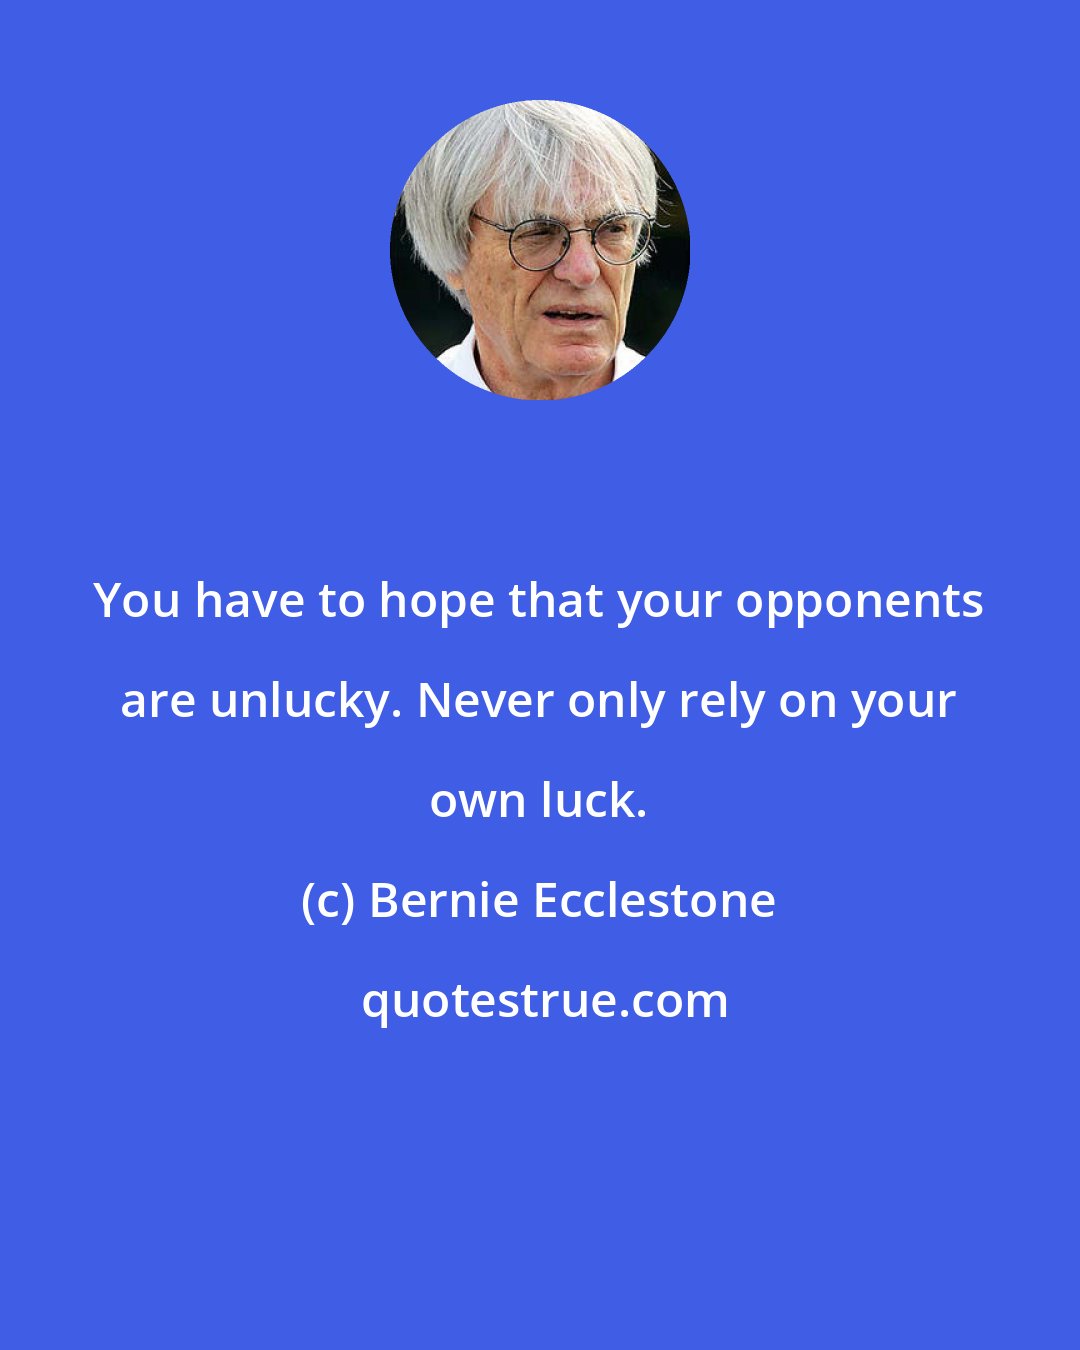 Bernie Ecclestone: You have to hope that your opponents are unlucky. Never only rely on your own luck.